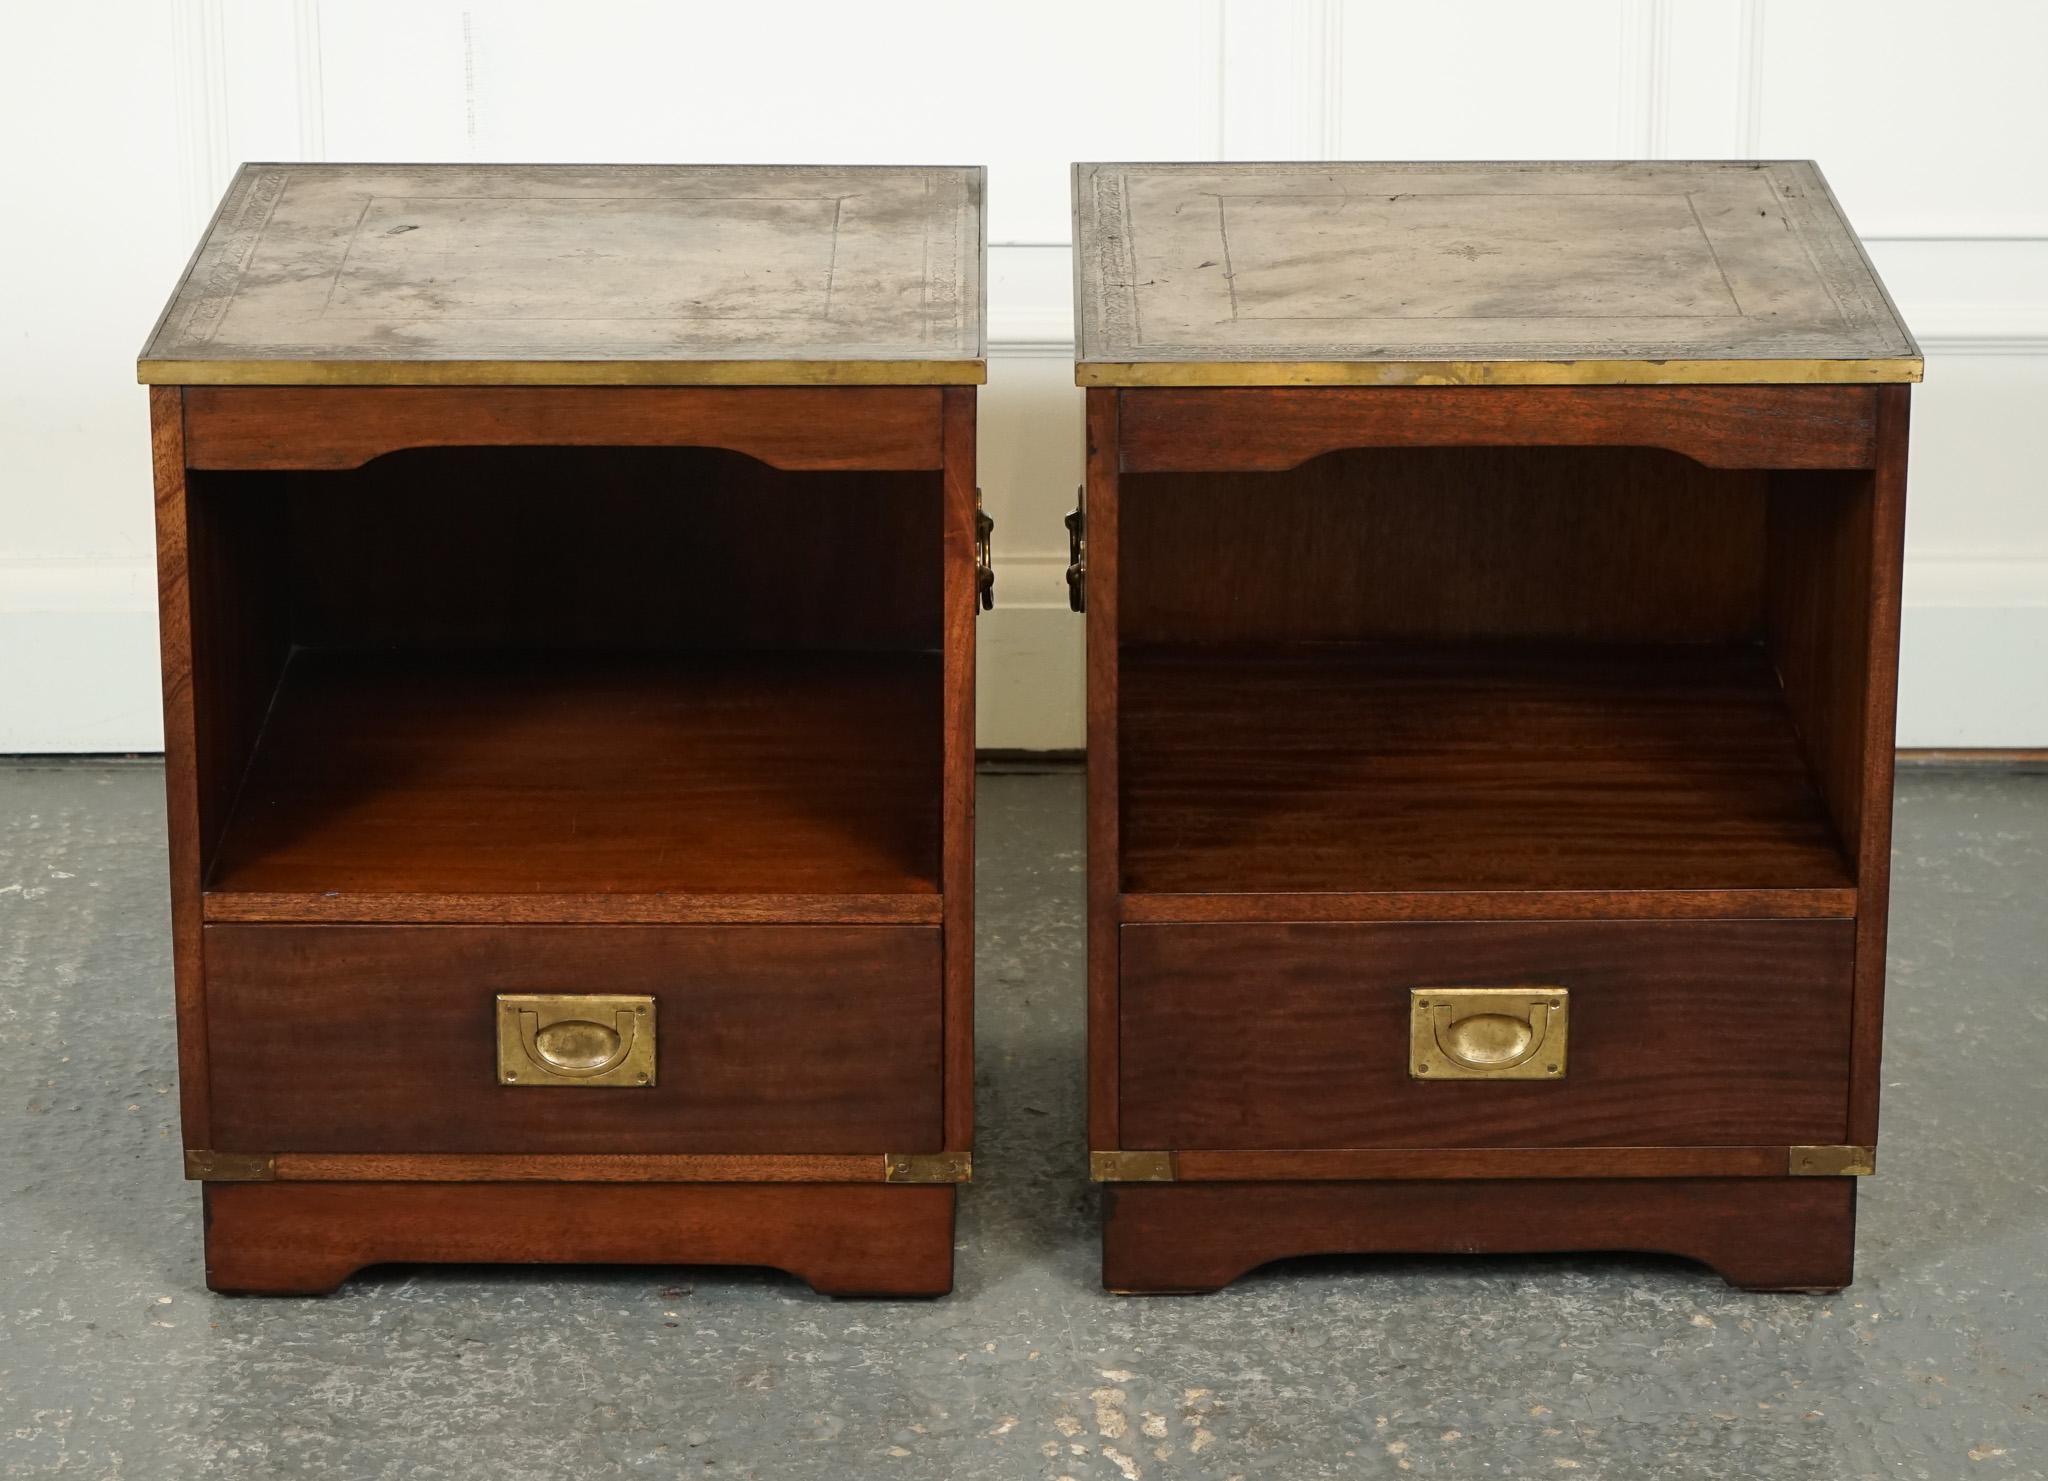 
We are delighted to offer for sale this Vintage Pair of Military Campaign Side Tables.

This set of vintage military campaign bedside tables nightstands is crafted with a rich brown leather top that adds a touch of elegance and sophistication to